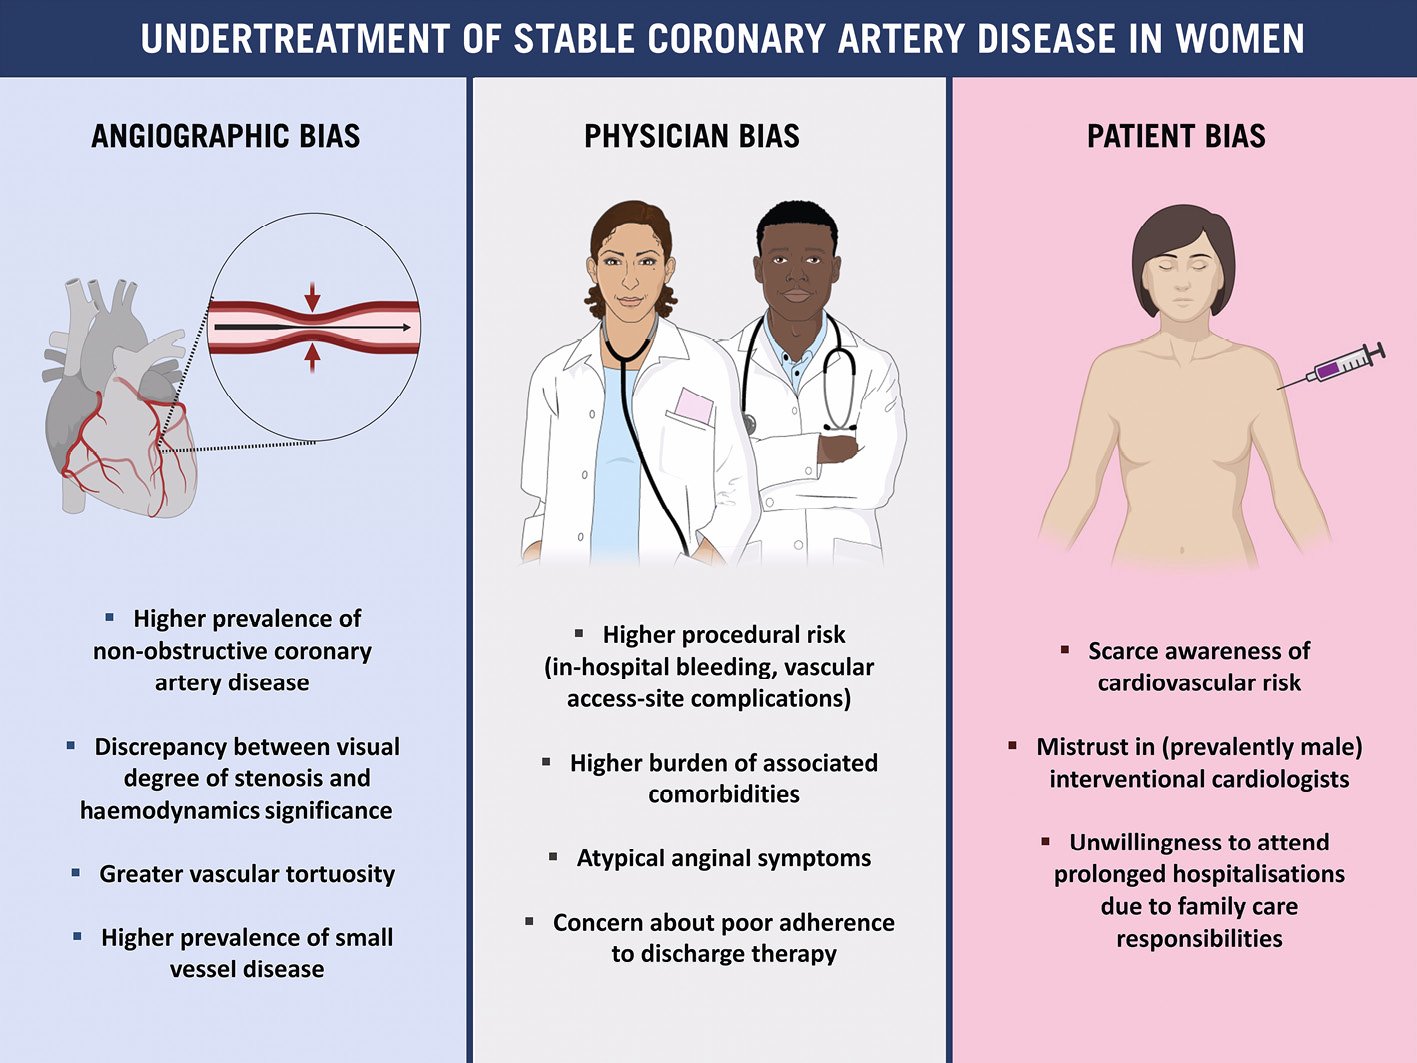 Women and coronary artery disease: not just underrepresented and underdiagnosed, but also undertreated!